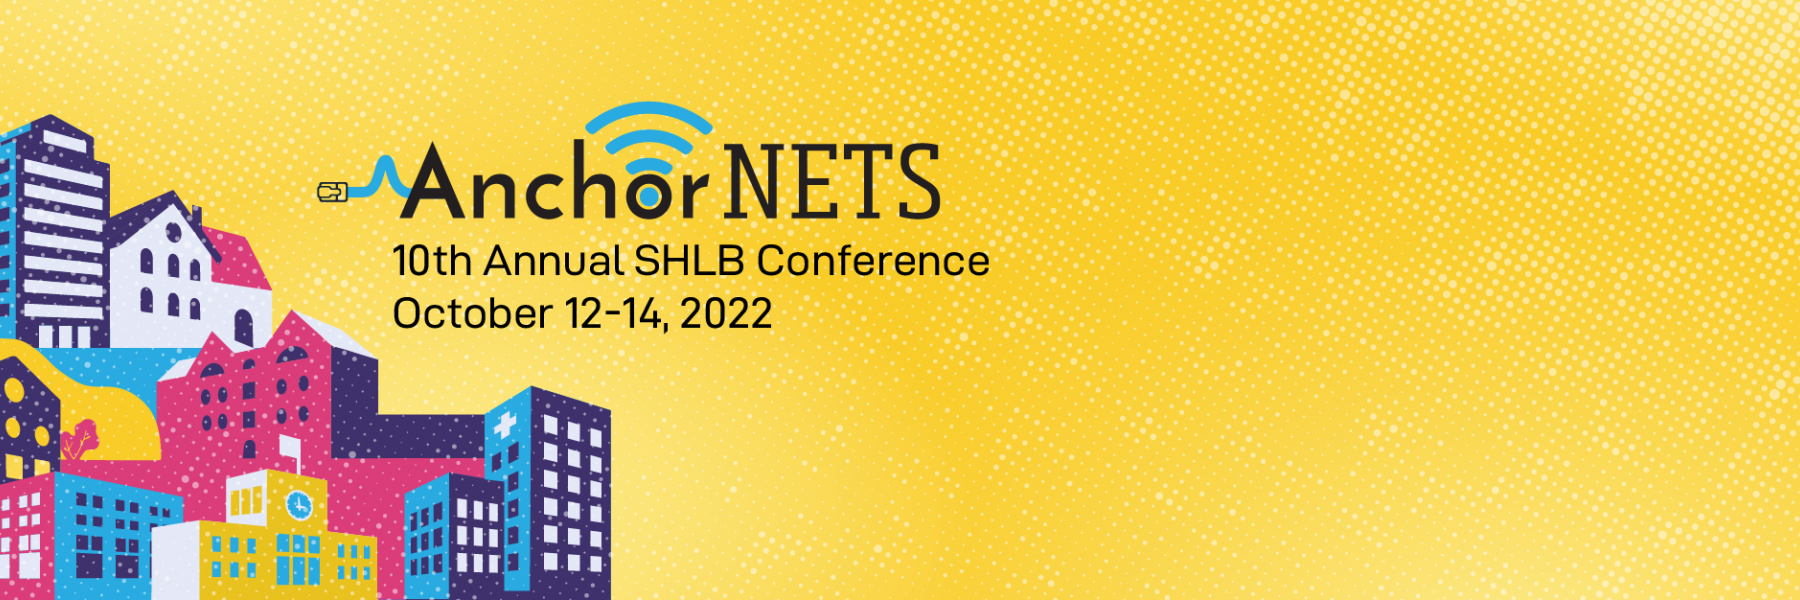 Early Bird Registration is Open for AnchorNets 2022!